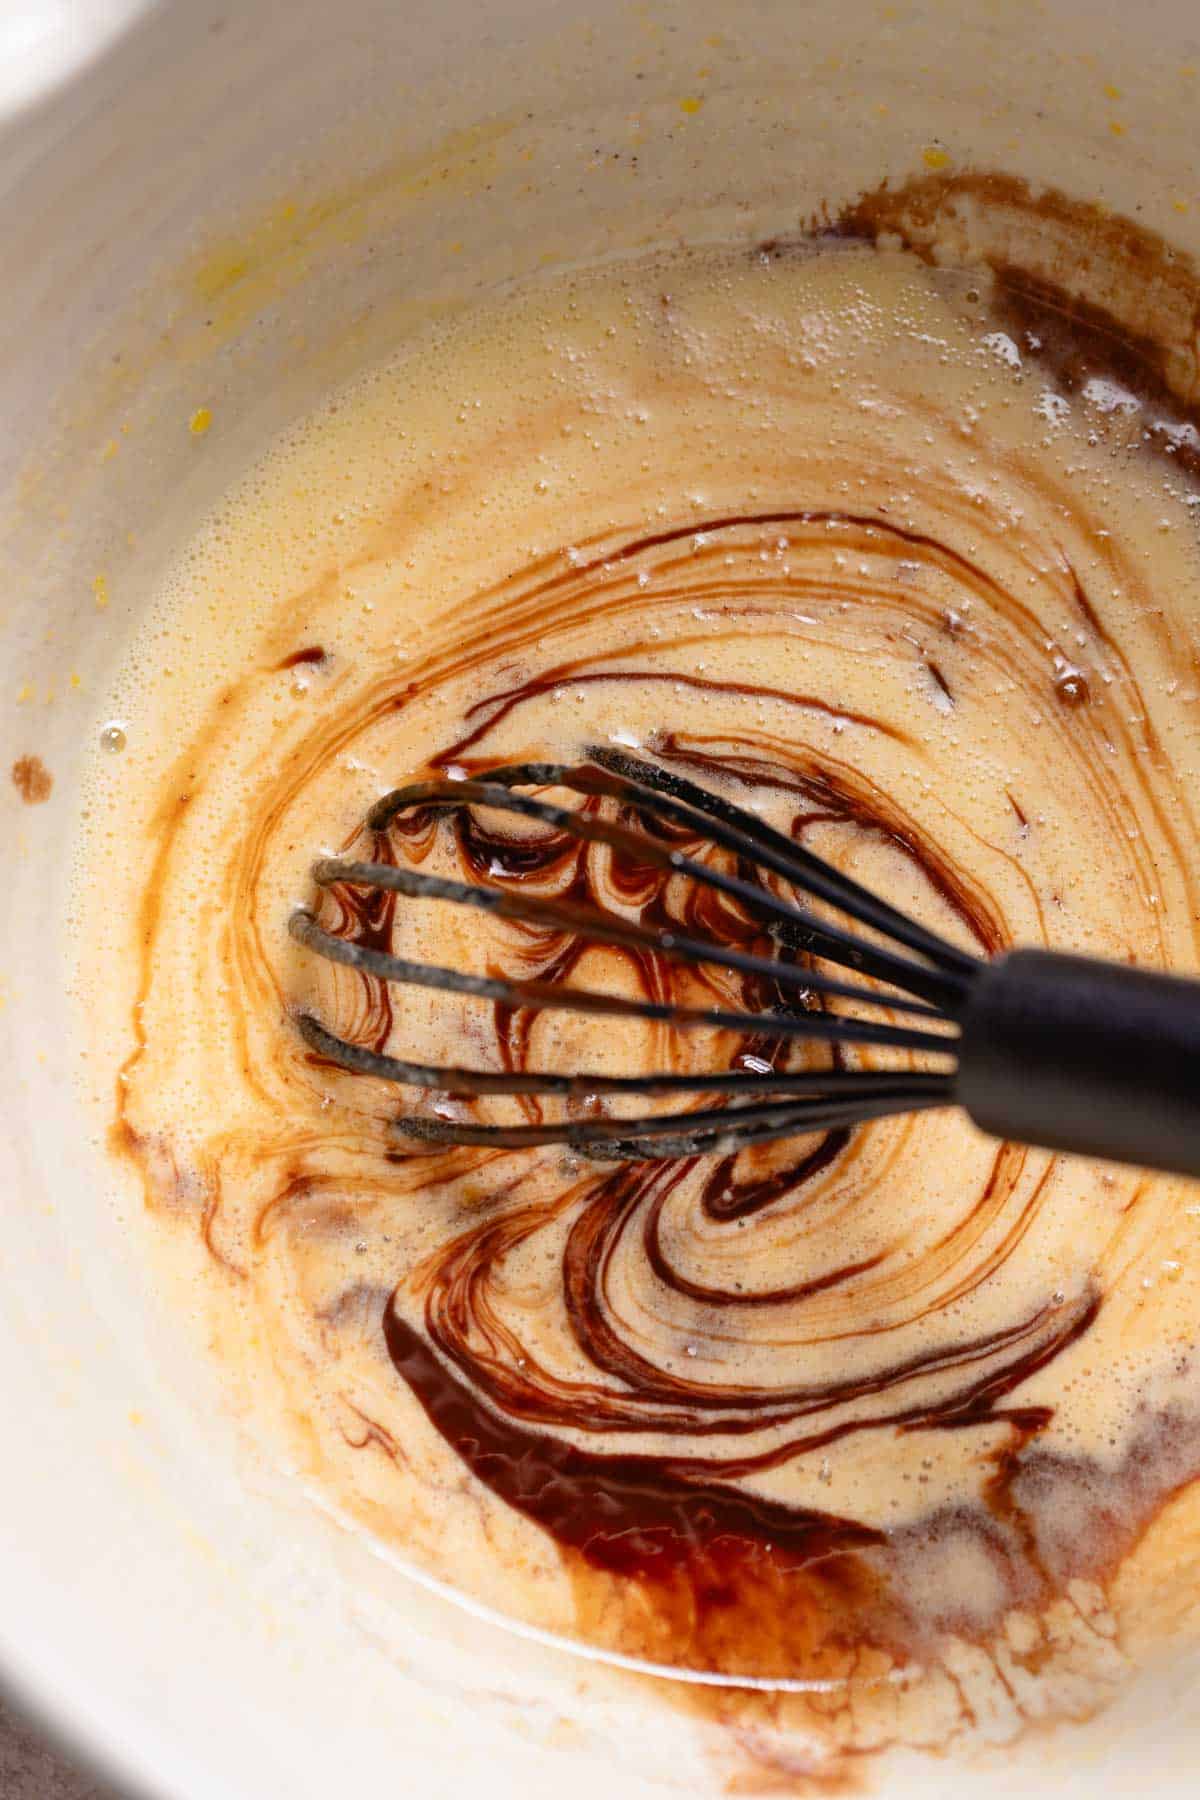 A whisk mixing the melted chocolate mixture into the eggs and sugar.